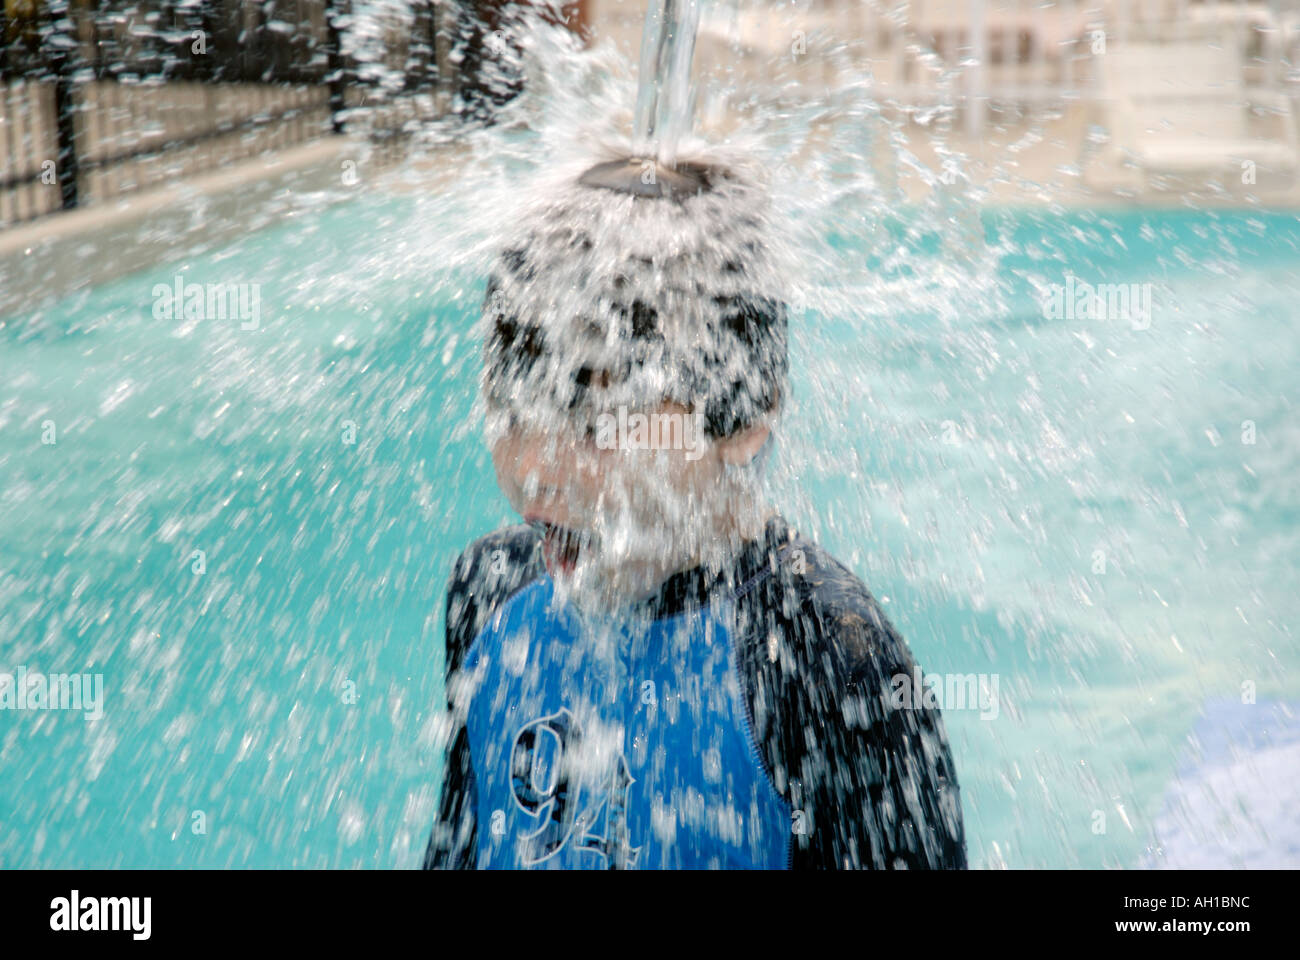 Boy under water cooling off at water park playground Stock Photo